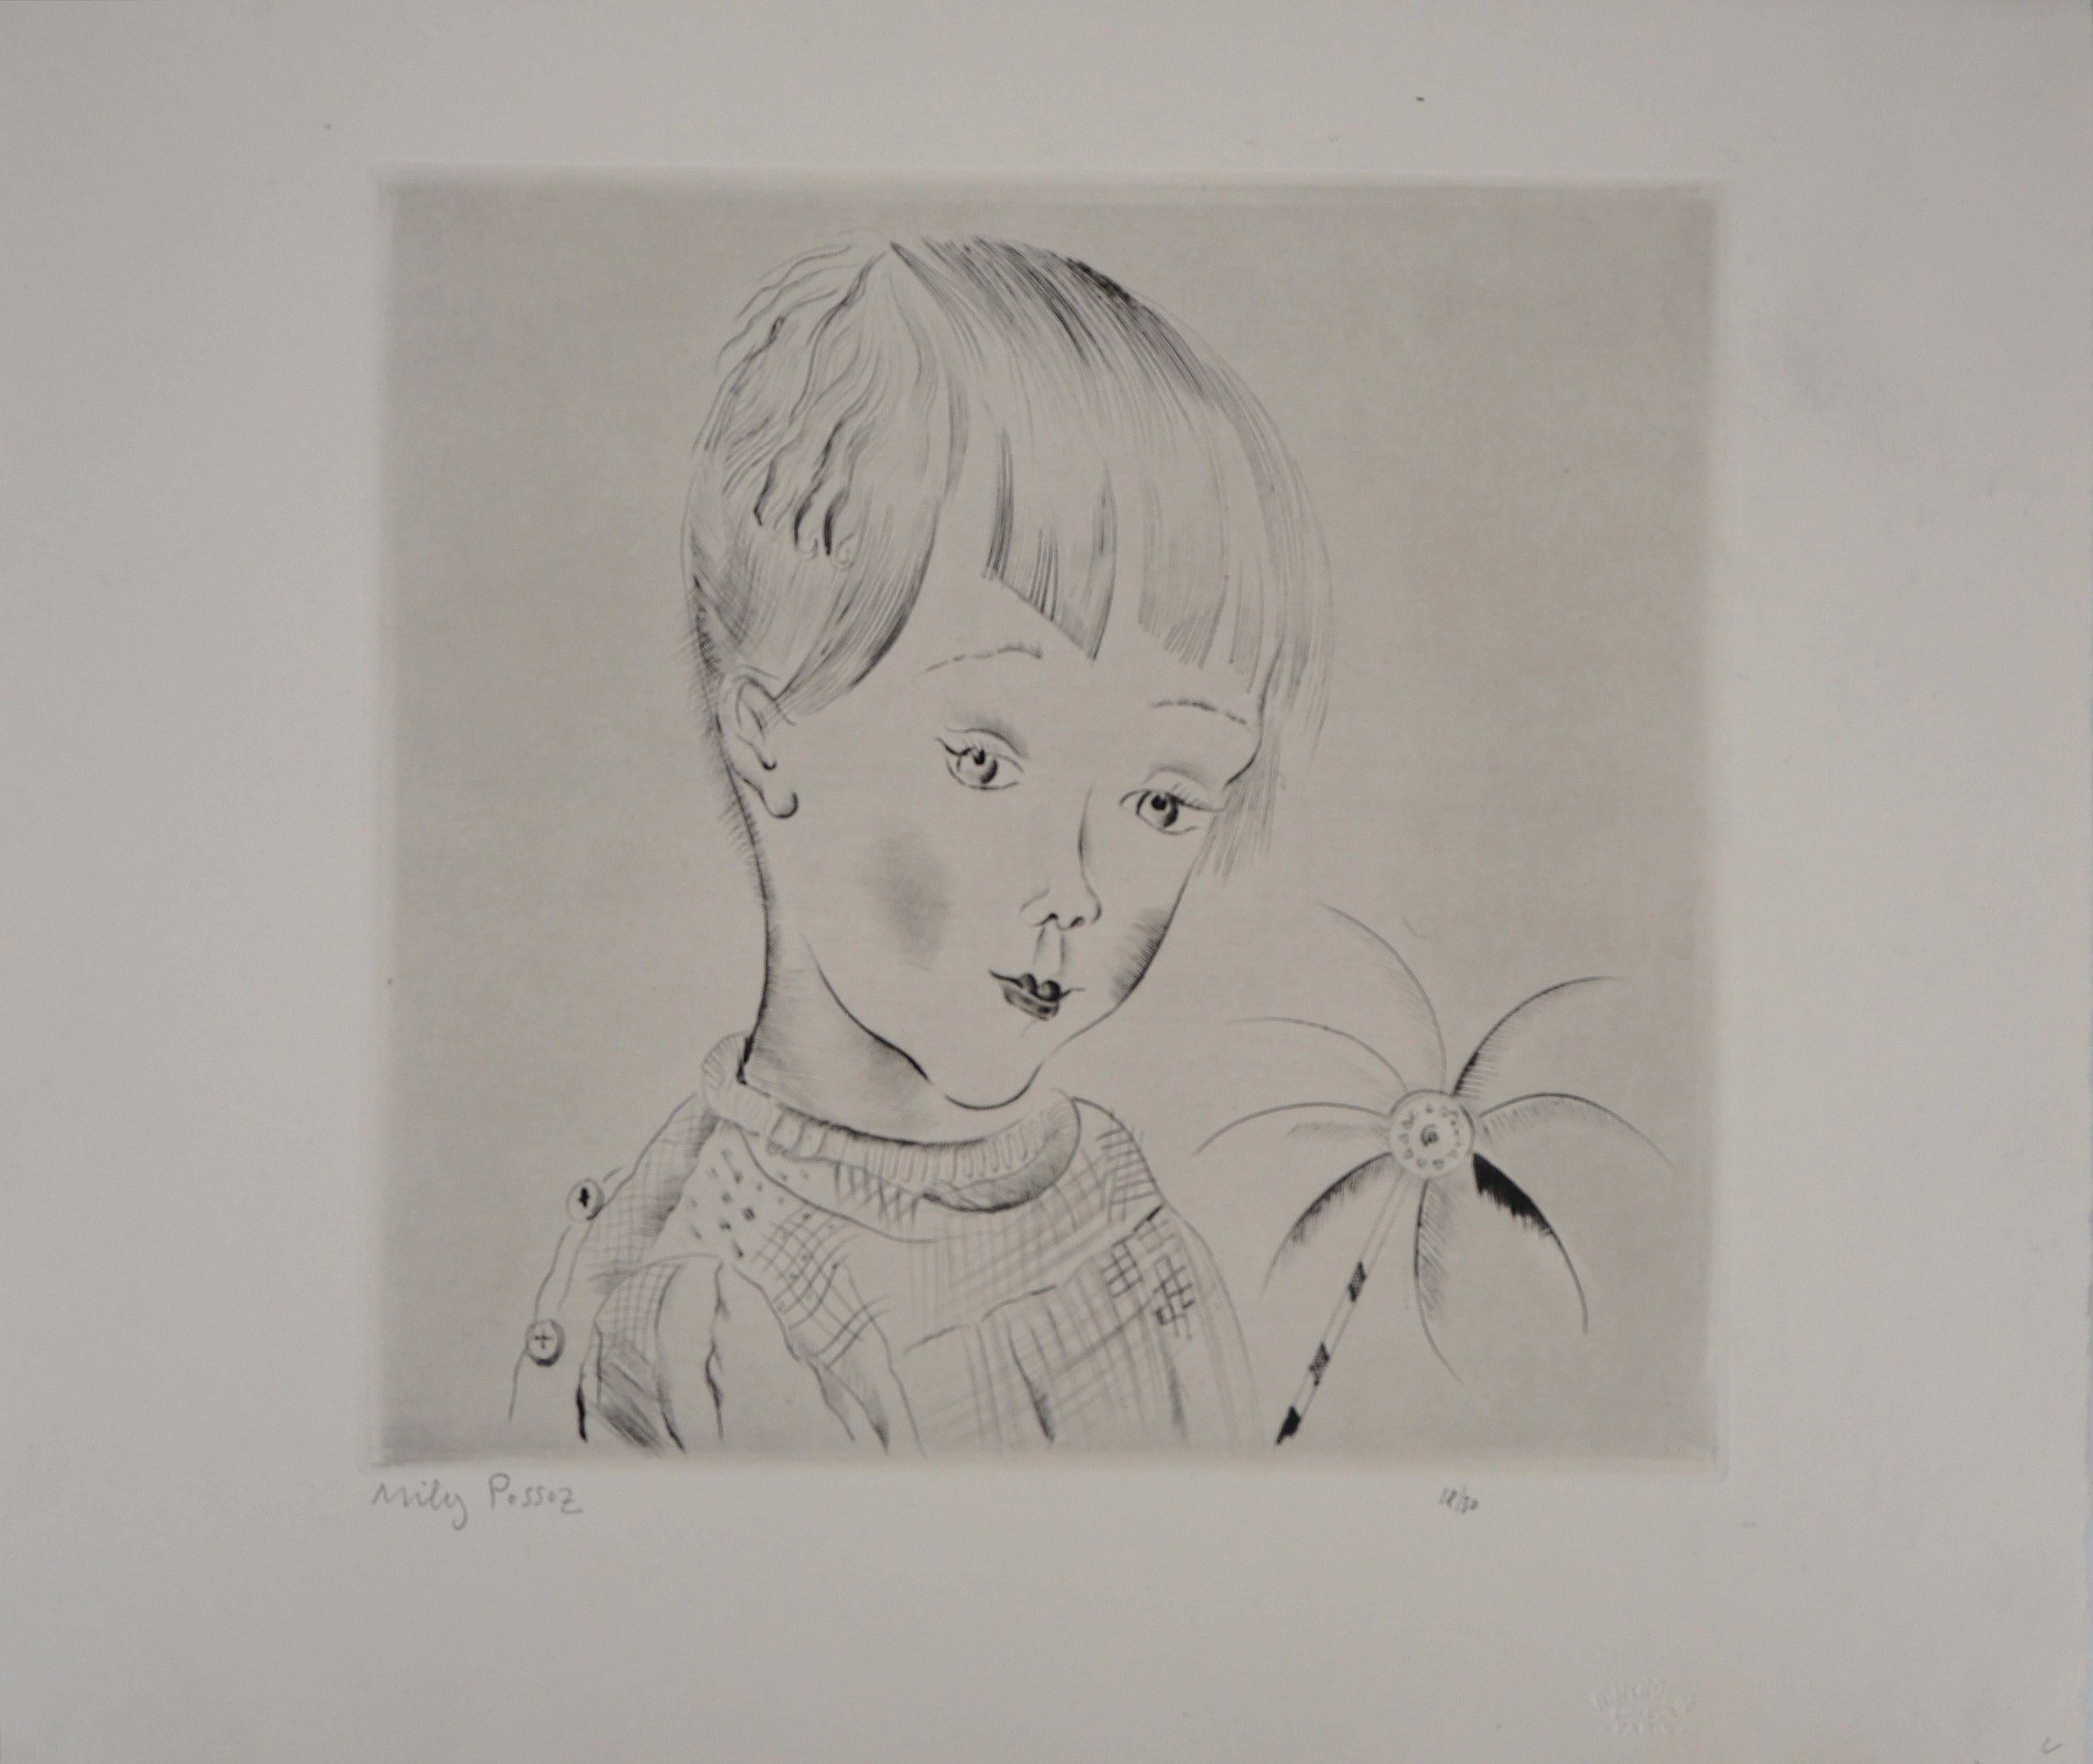 Little Girl With Her Toy - Original Handsigned Etching